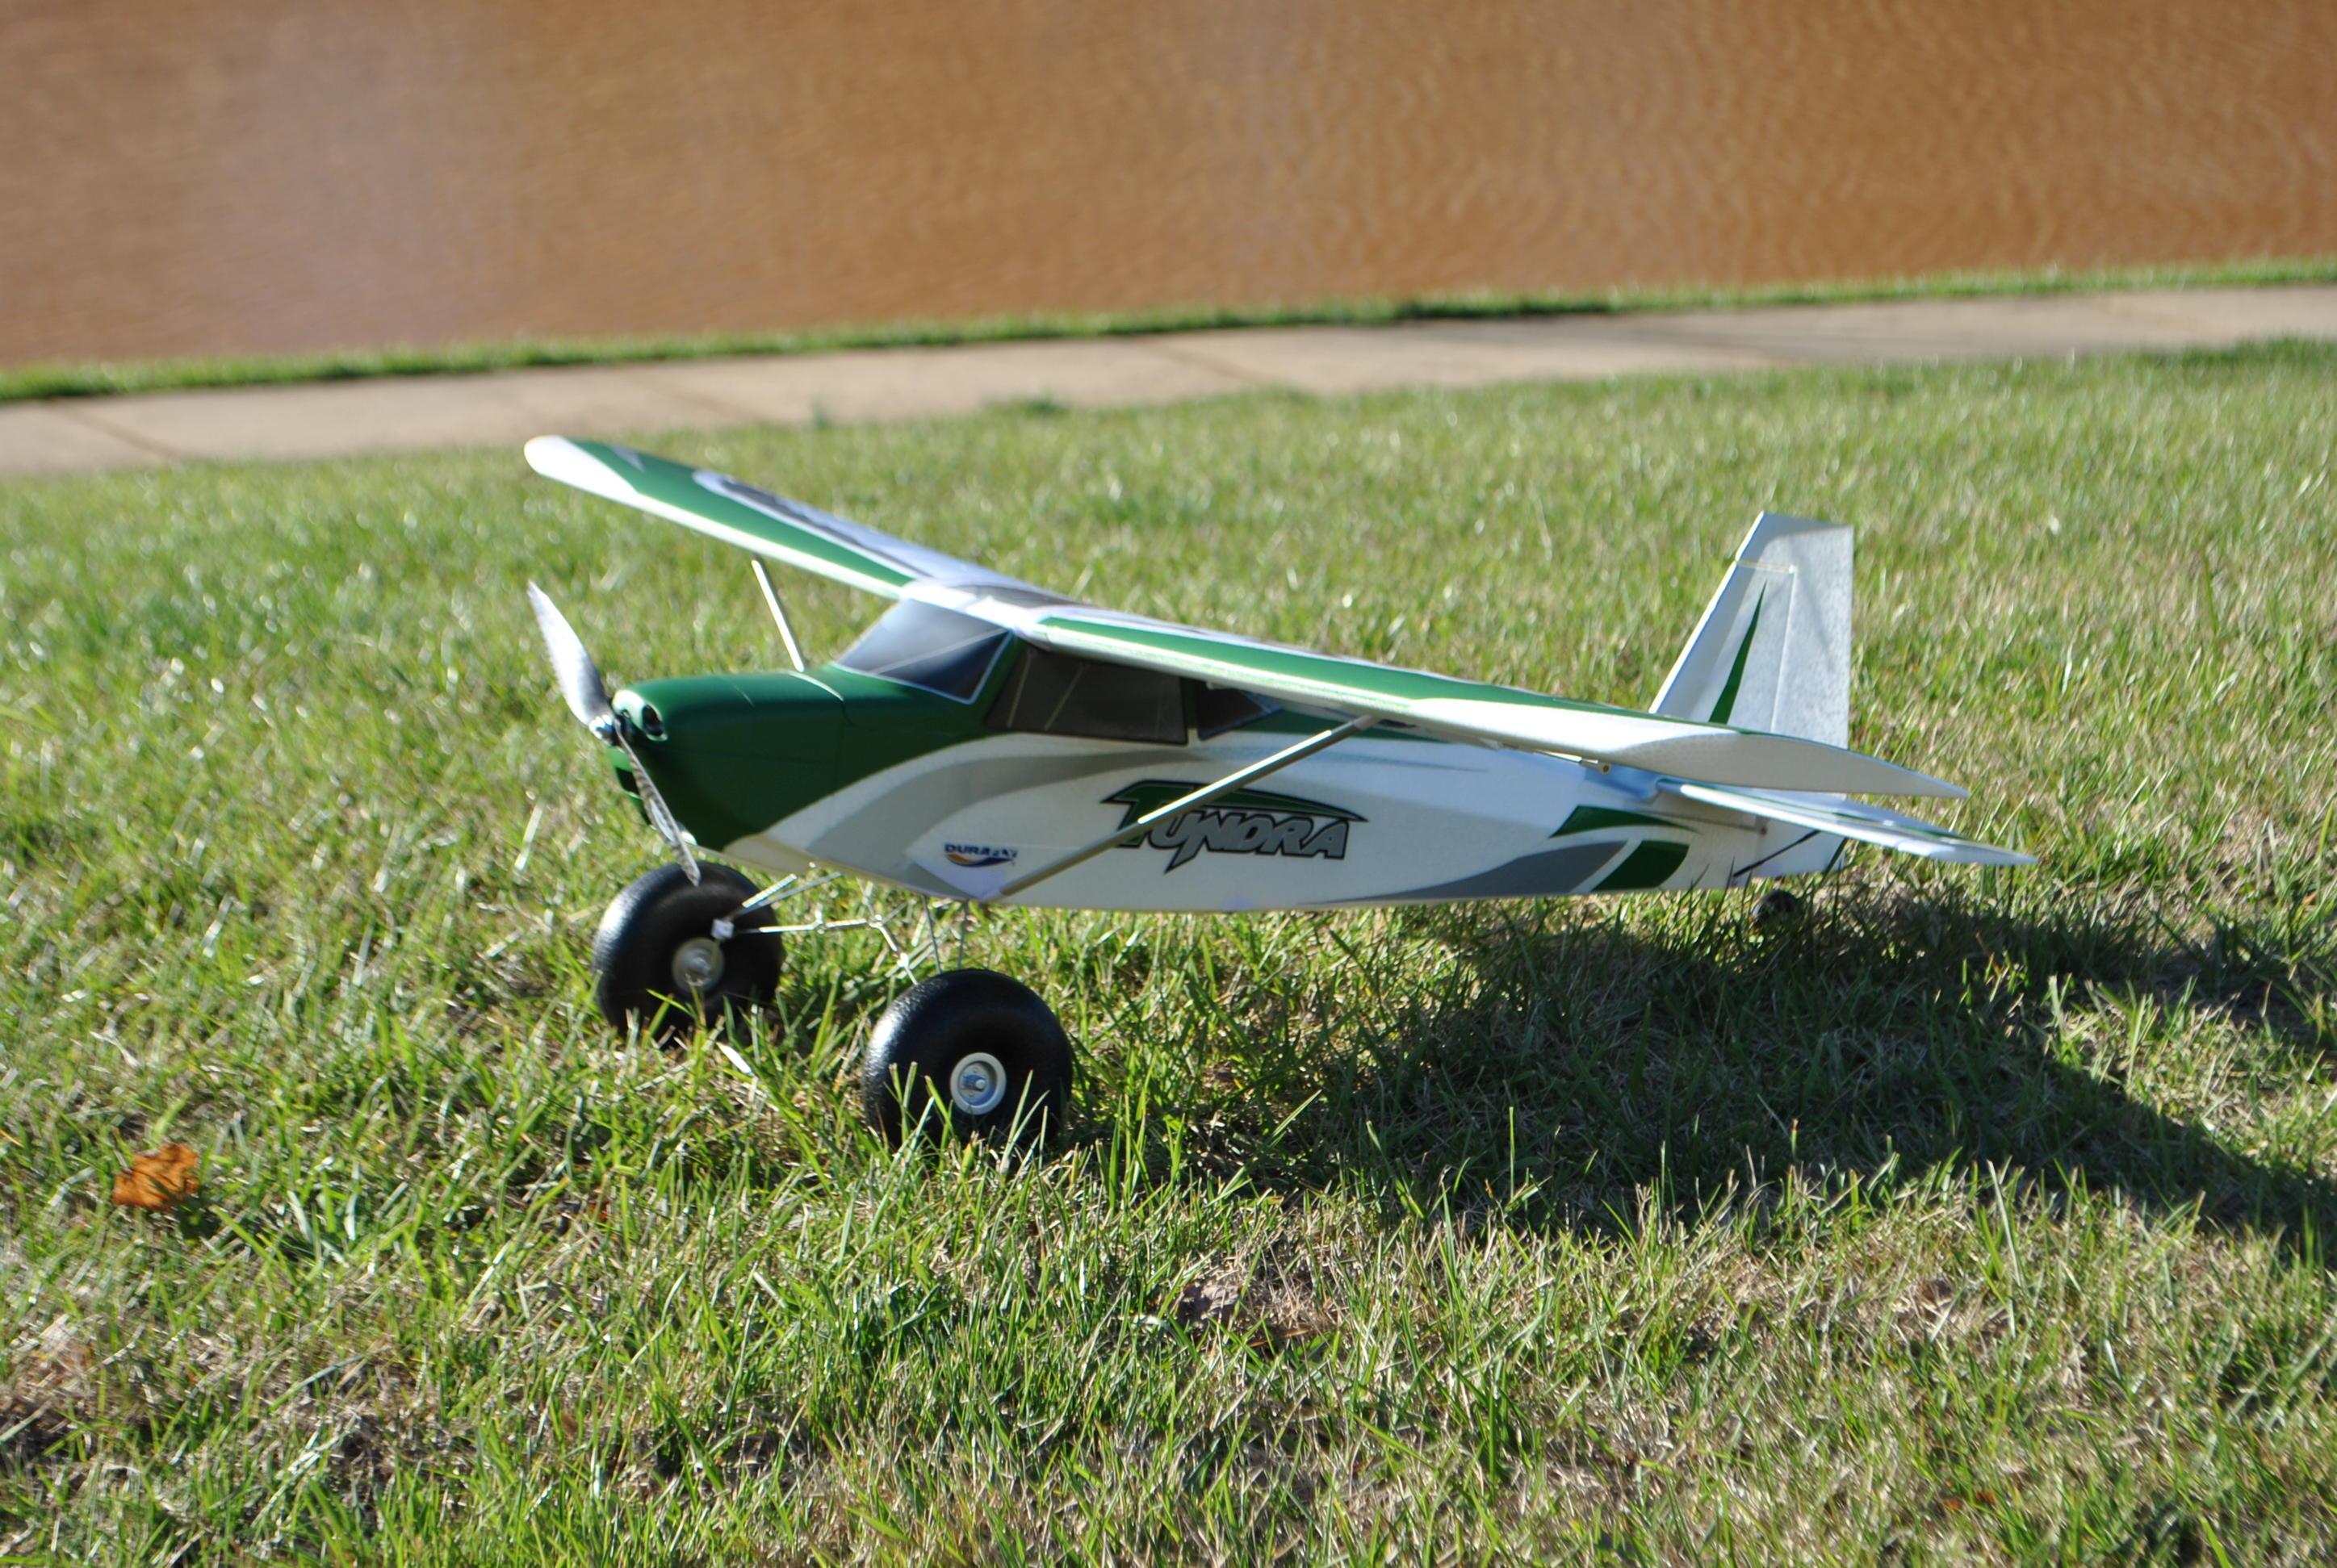 Tundra Rc Plane: Where to Buy and Enhance Your Tundra RC Plane